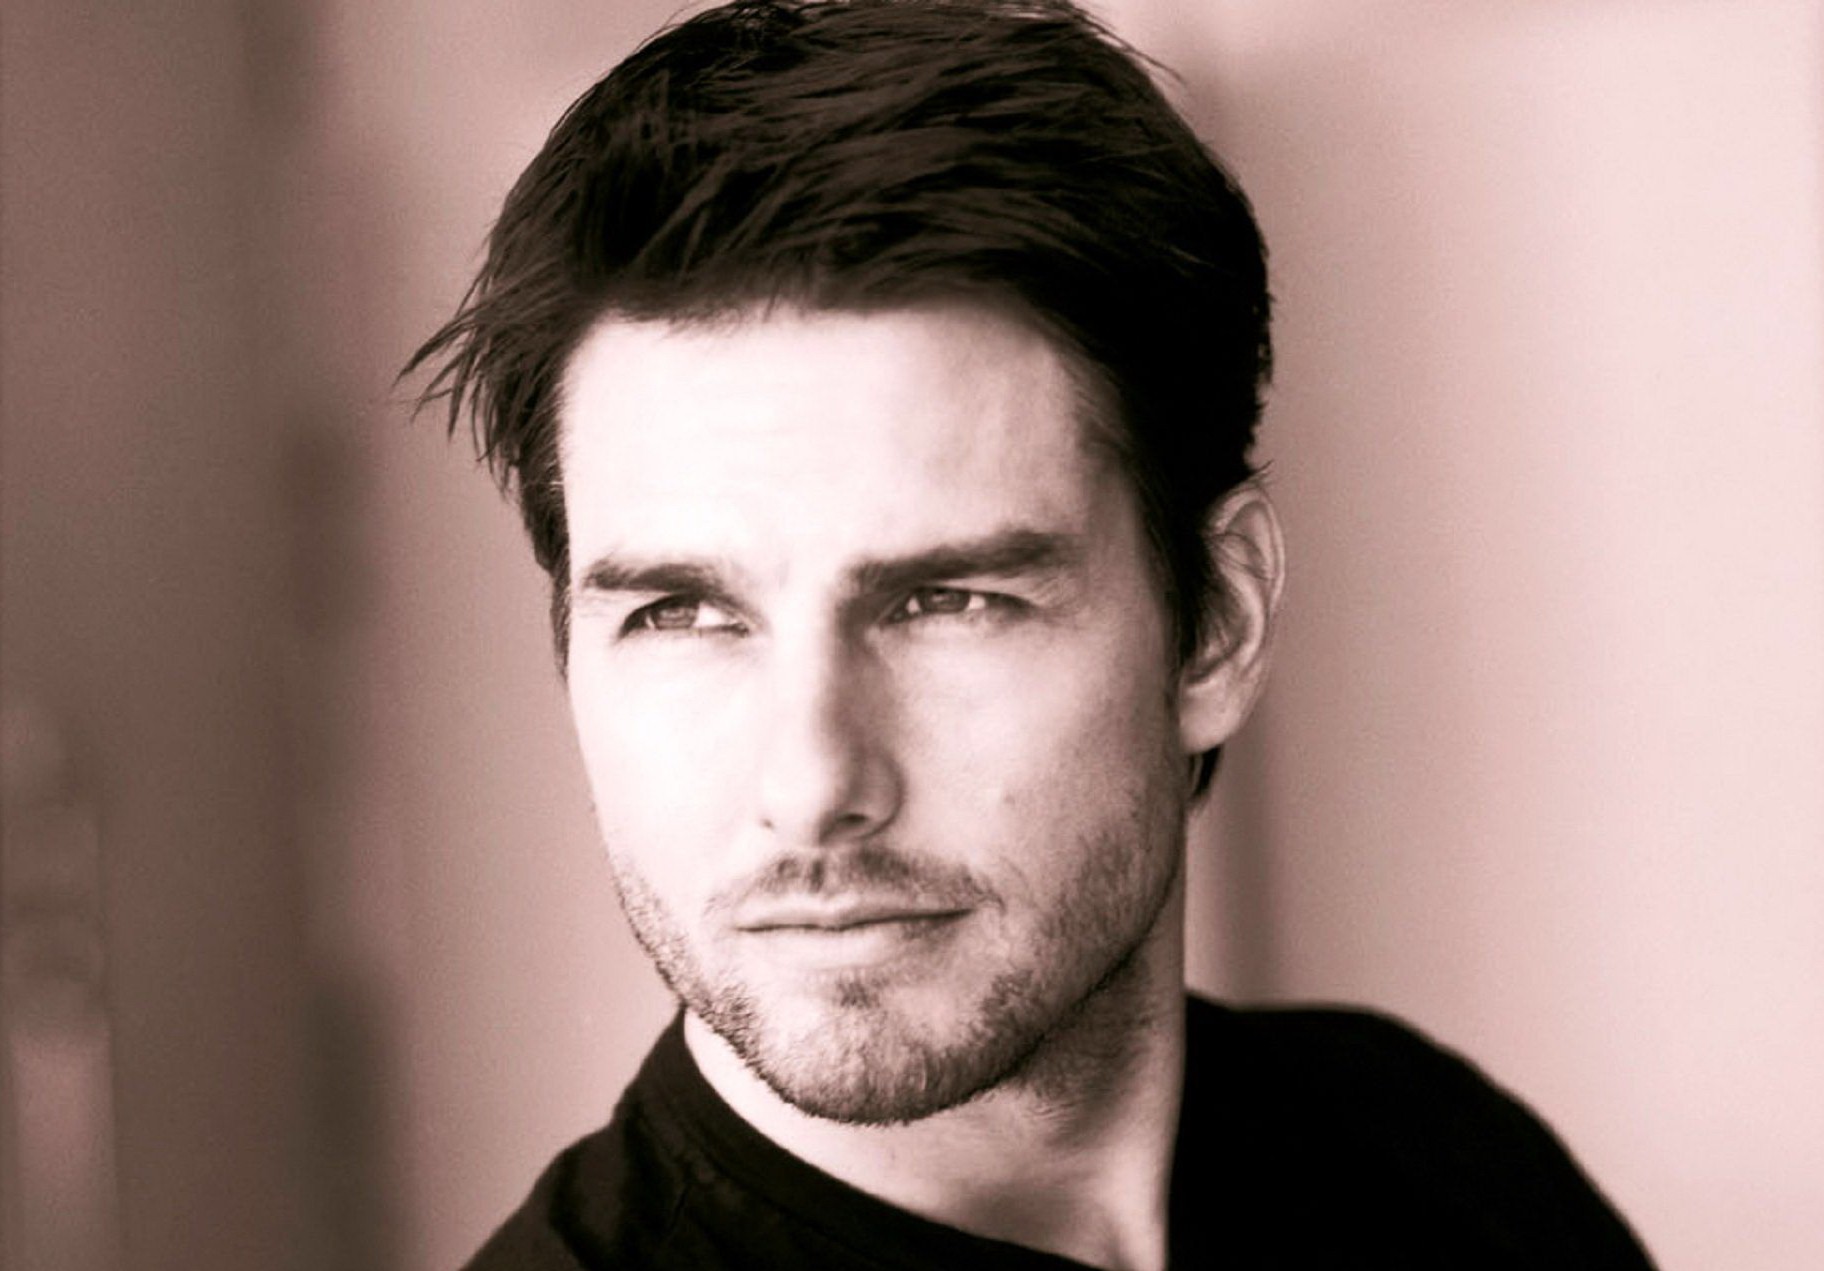 Wallpaper Of Tom Cruise HD Lawrence Mcilrath On